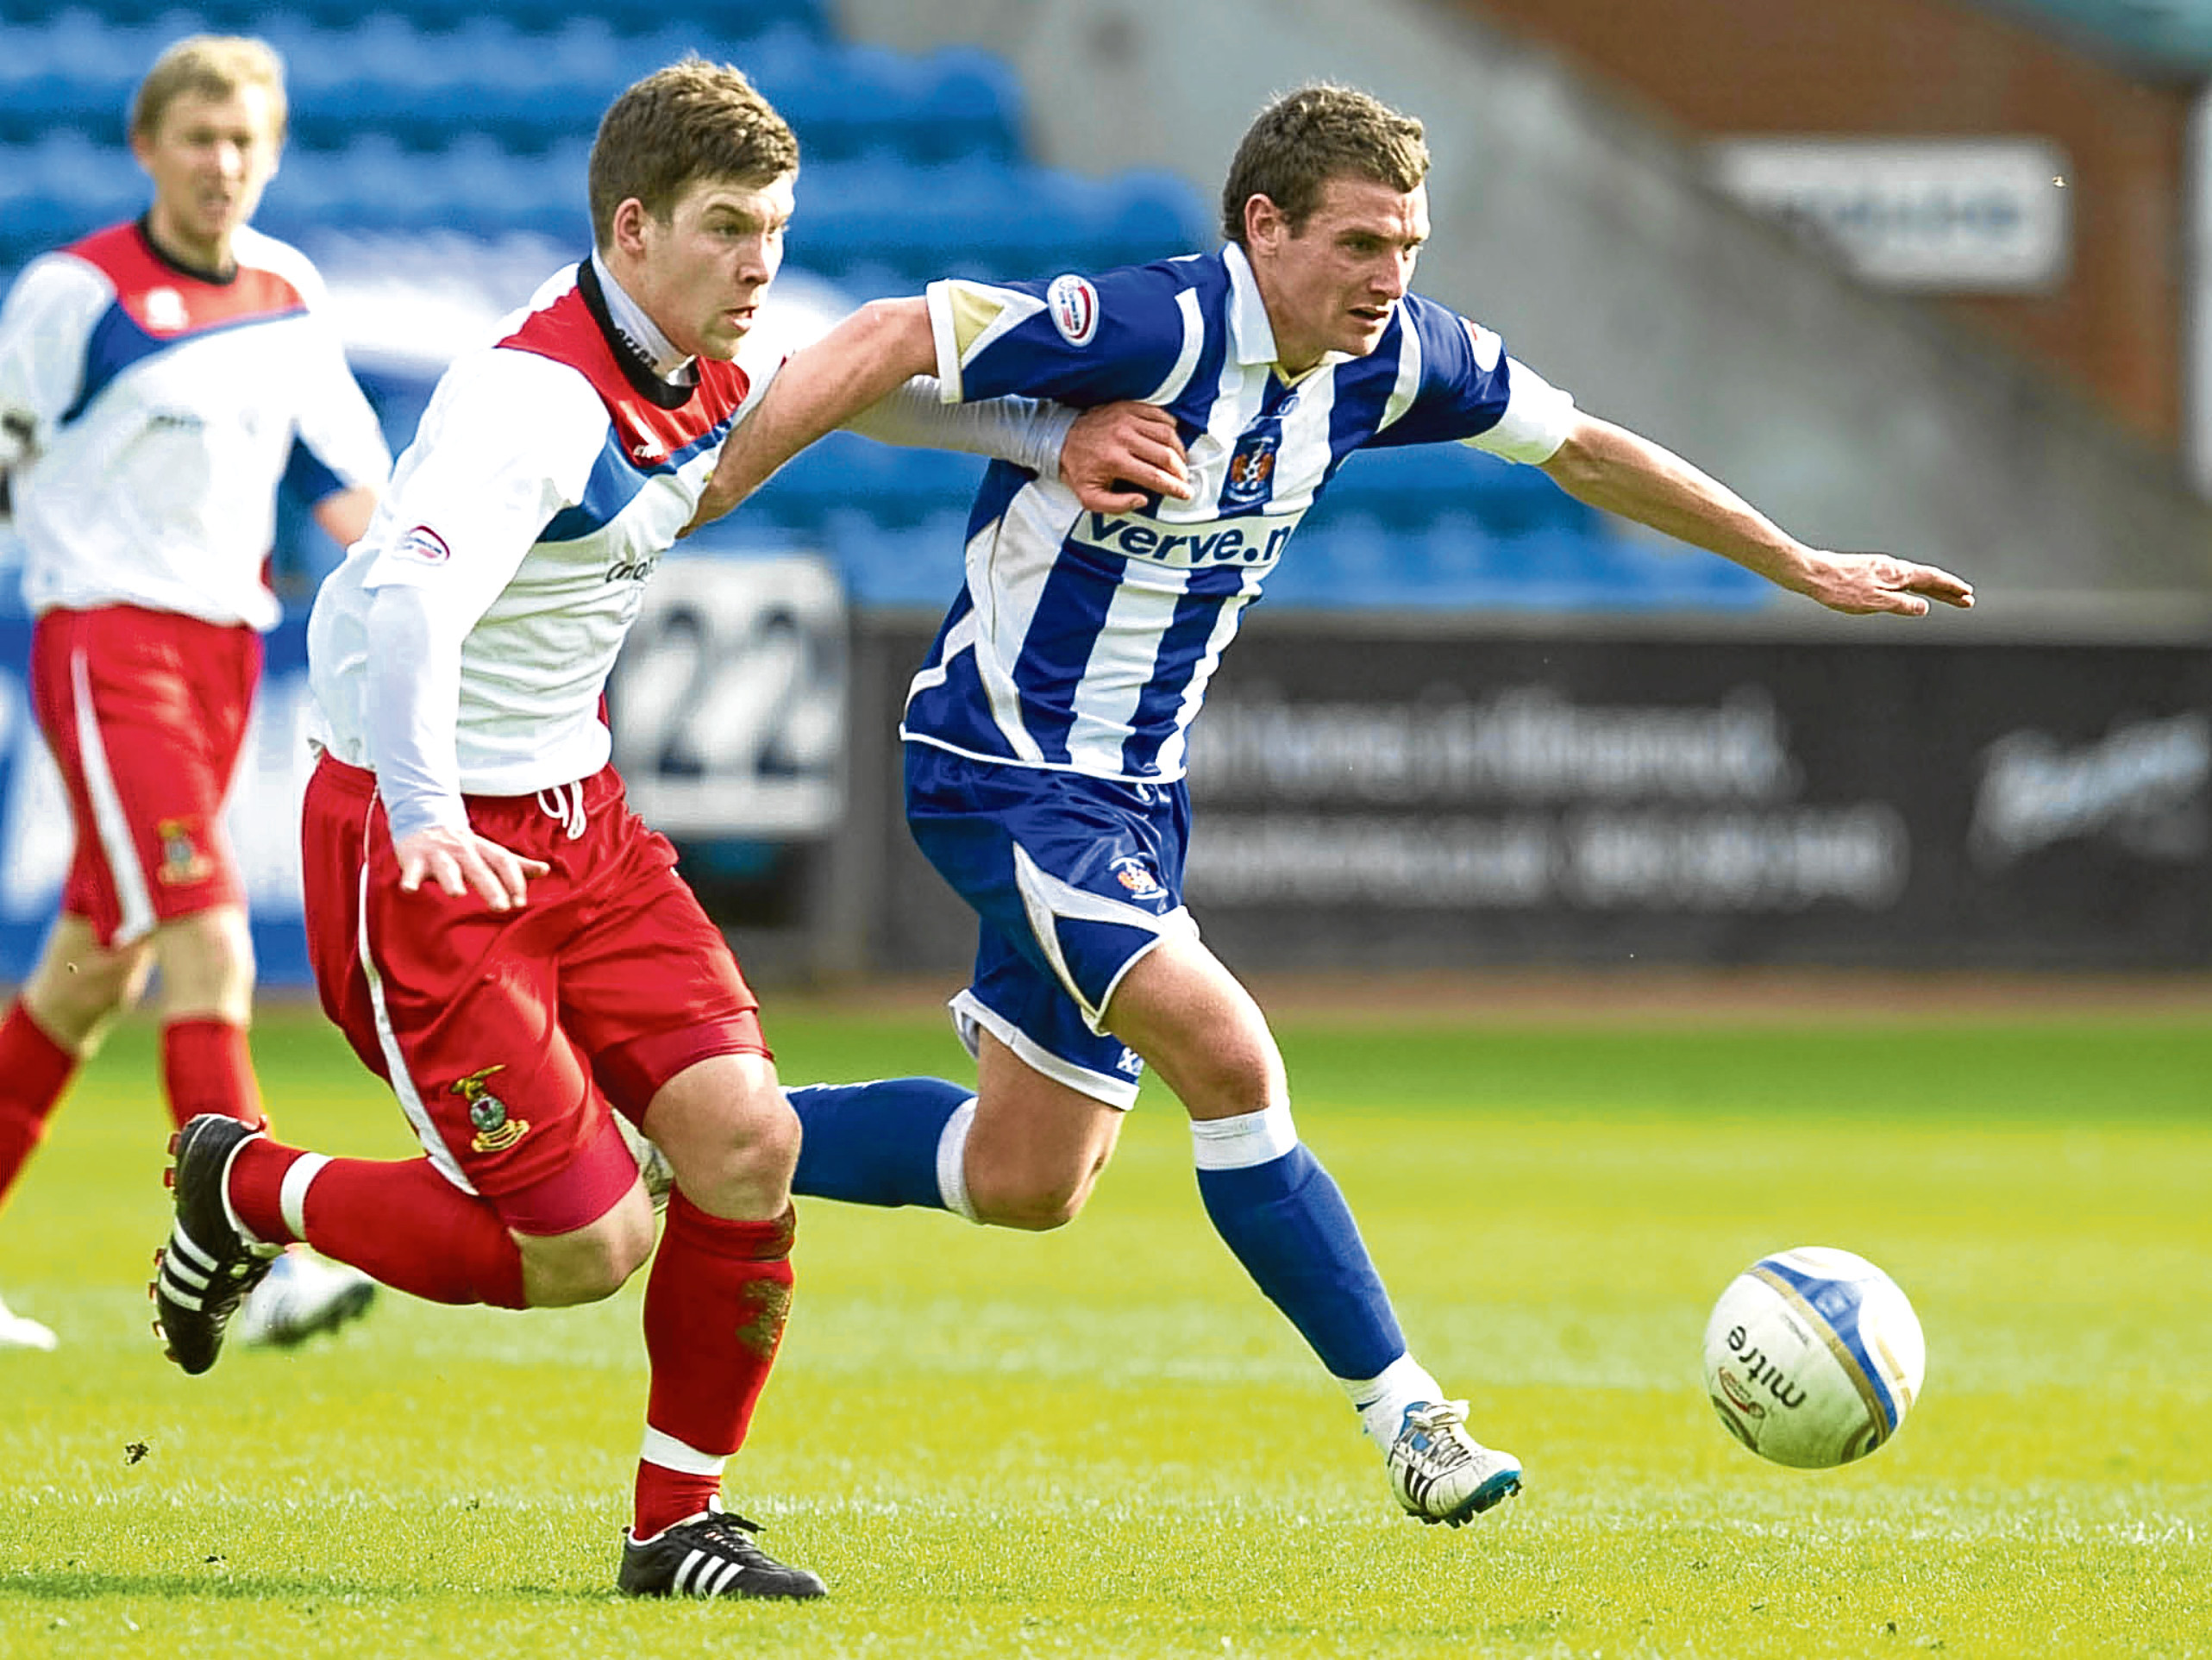 Kilmarnock's Craig Bryson (right) is challenged by Gavin Morrison in 2011